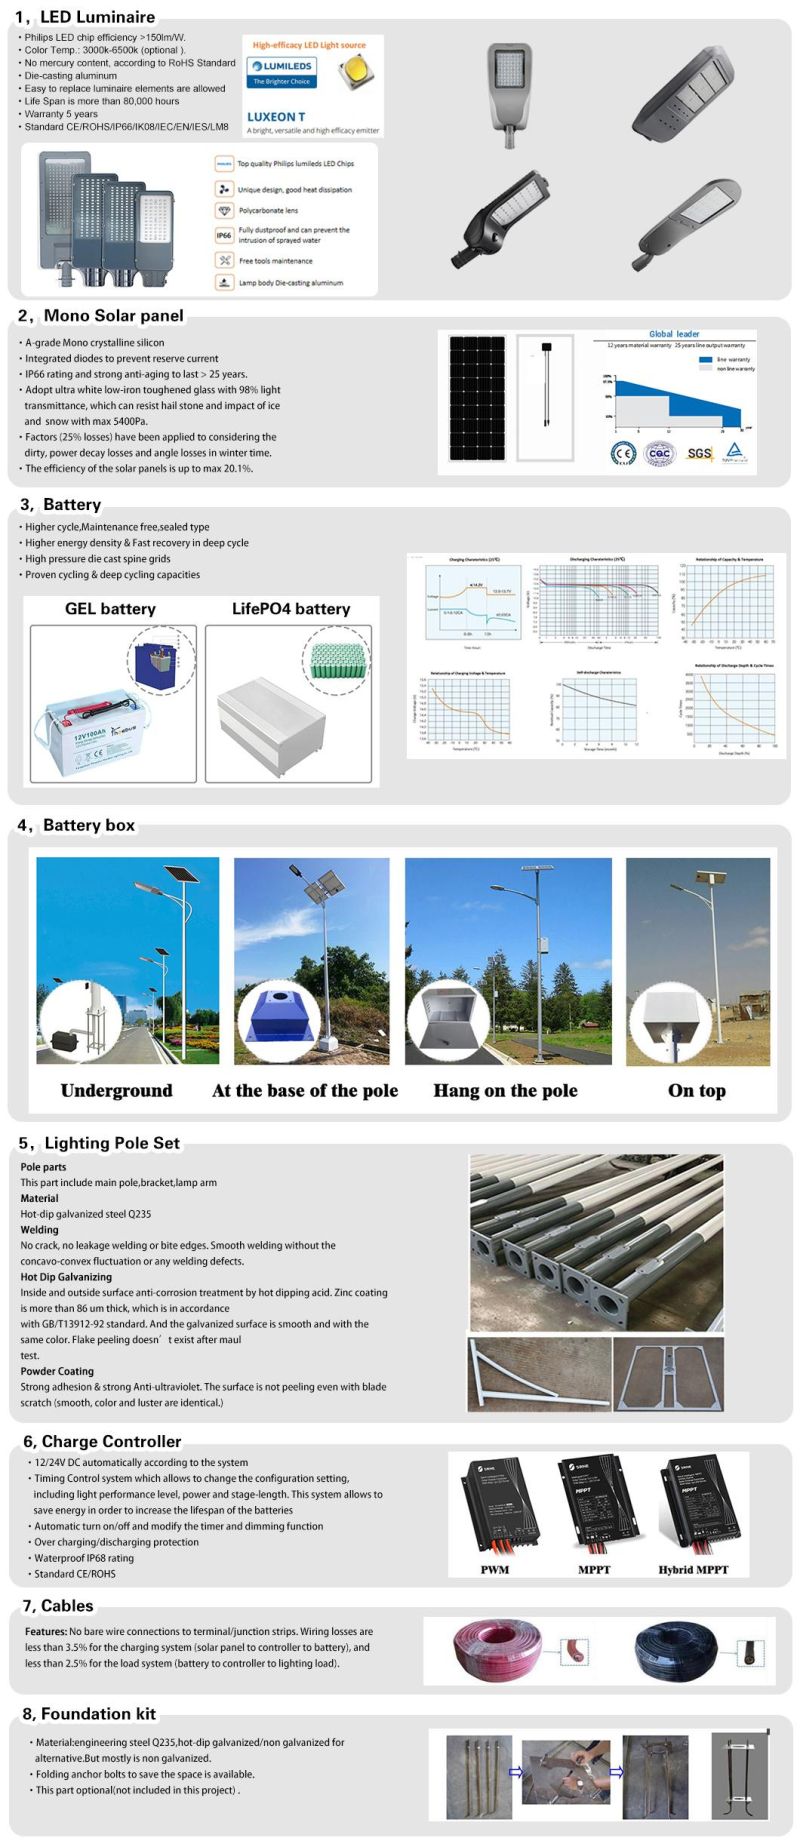 China Manufacturer Good Quality 9m Pole Double 70W LED Power Outdoor Split Solar Street Light Road Lamp with Hanging Gel Battery or Lithium Battery